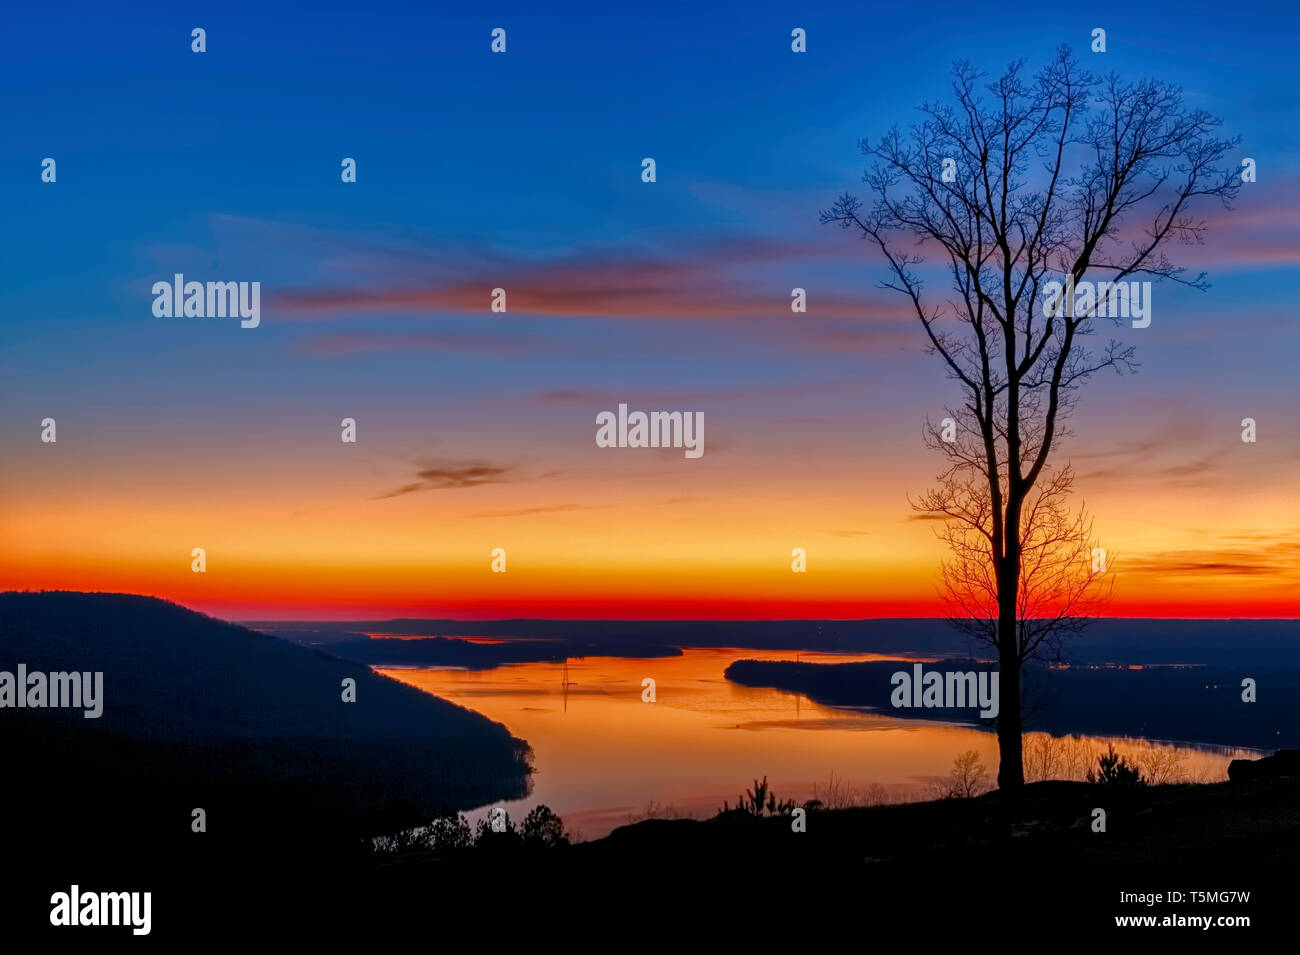 Colorful sunset on the Tennessee River Stock Photo